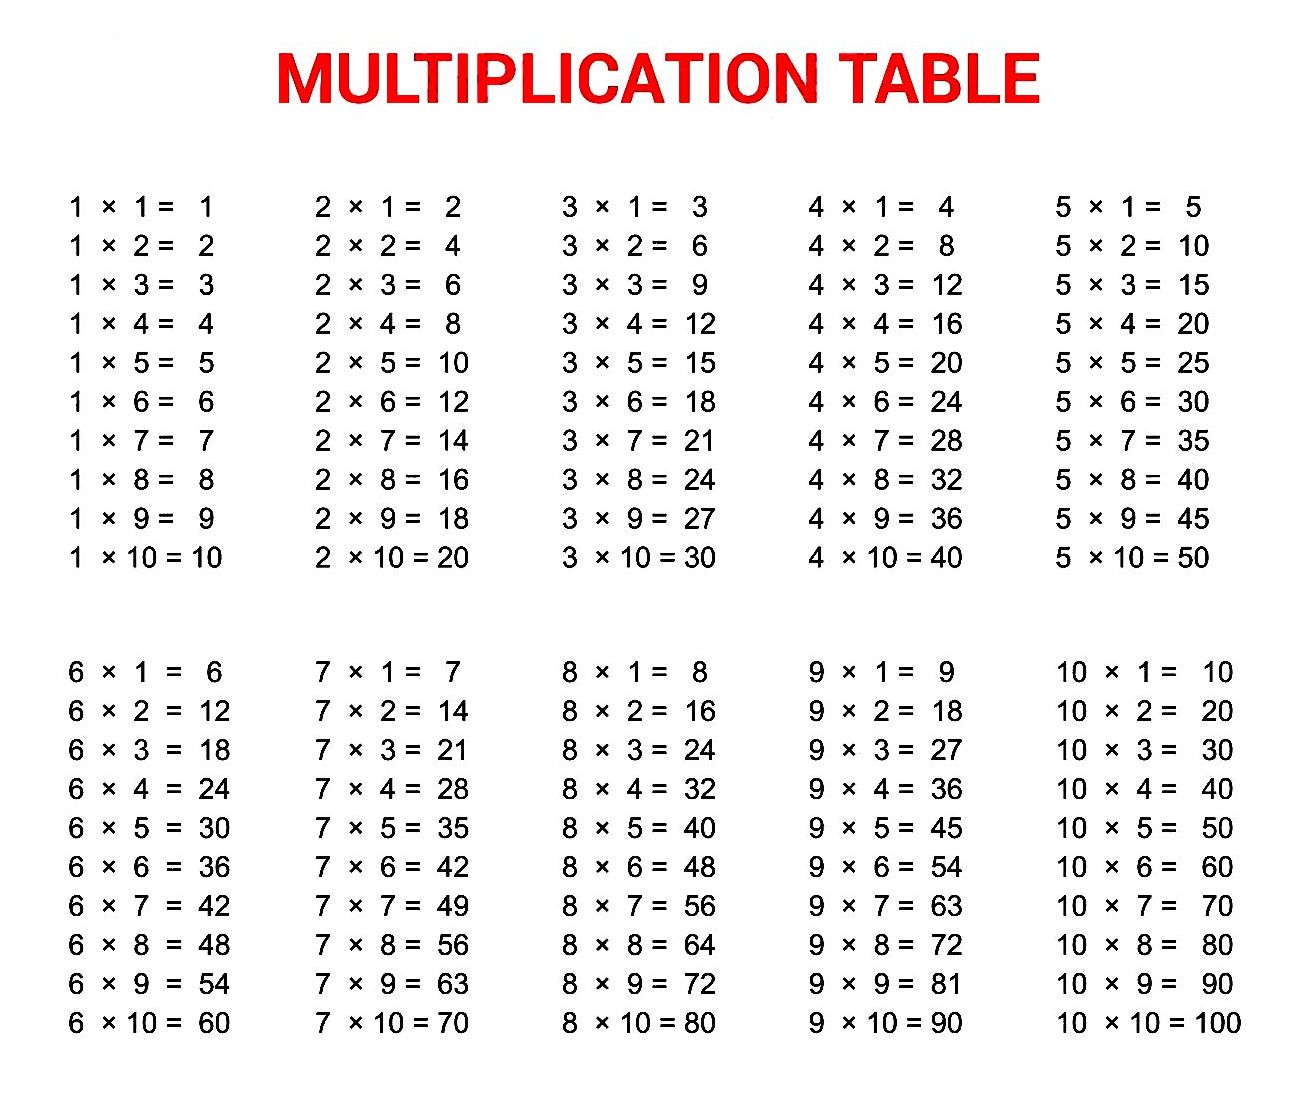 Multiplication Table 1 To 10 PDF